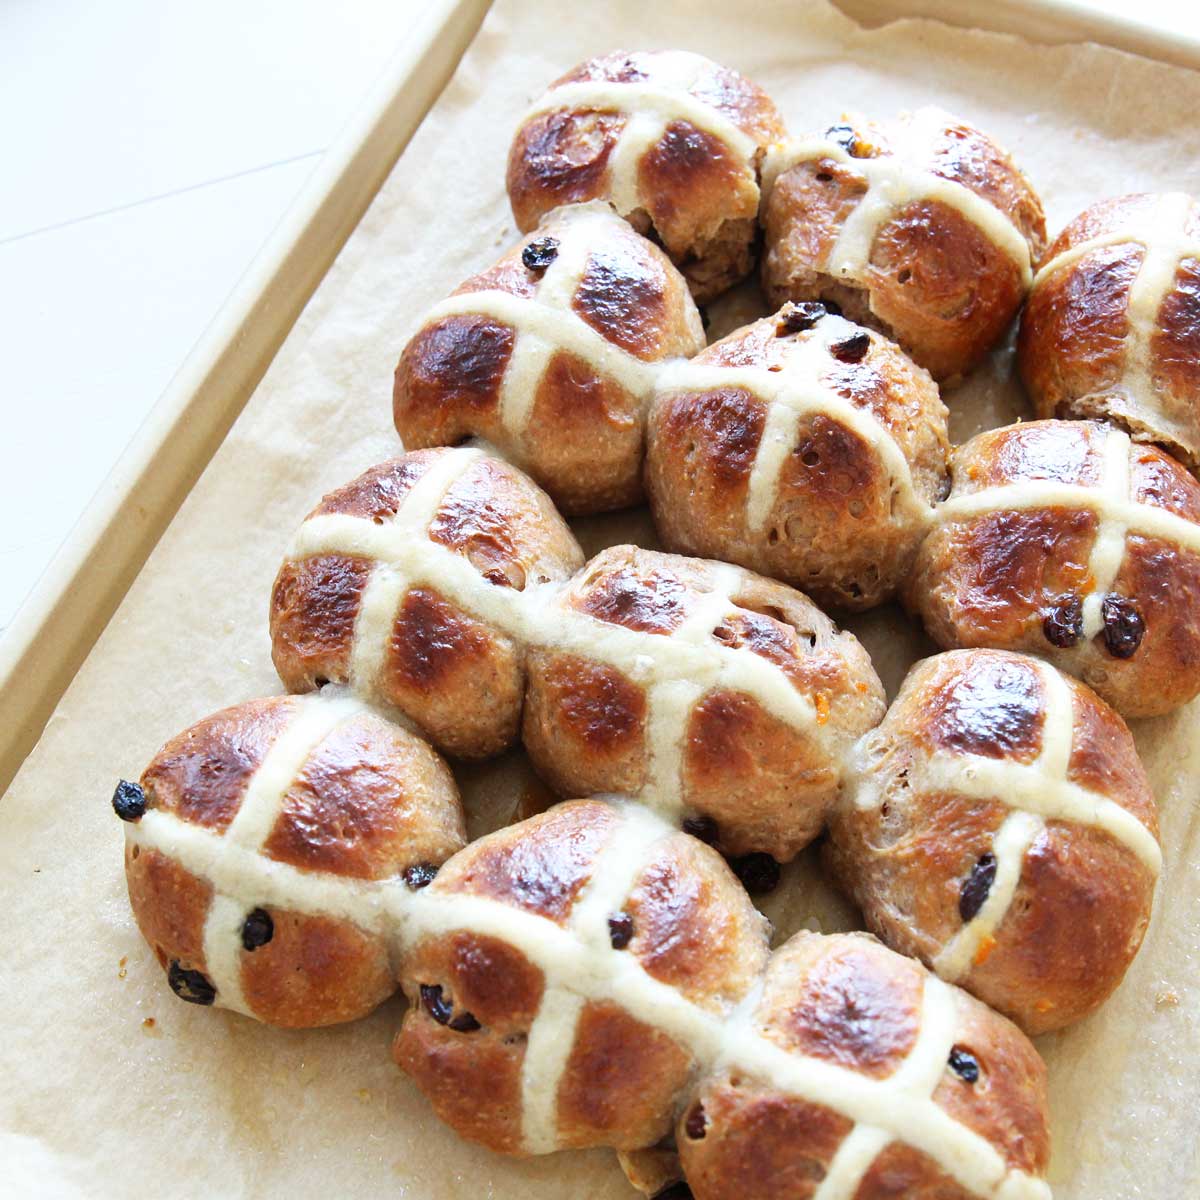 Soft & Fluffy Ricotta Cheese Hot Cross Buns - Perfect for Easter! - Carrot Swiss Roll Cake